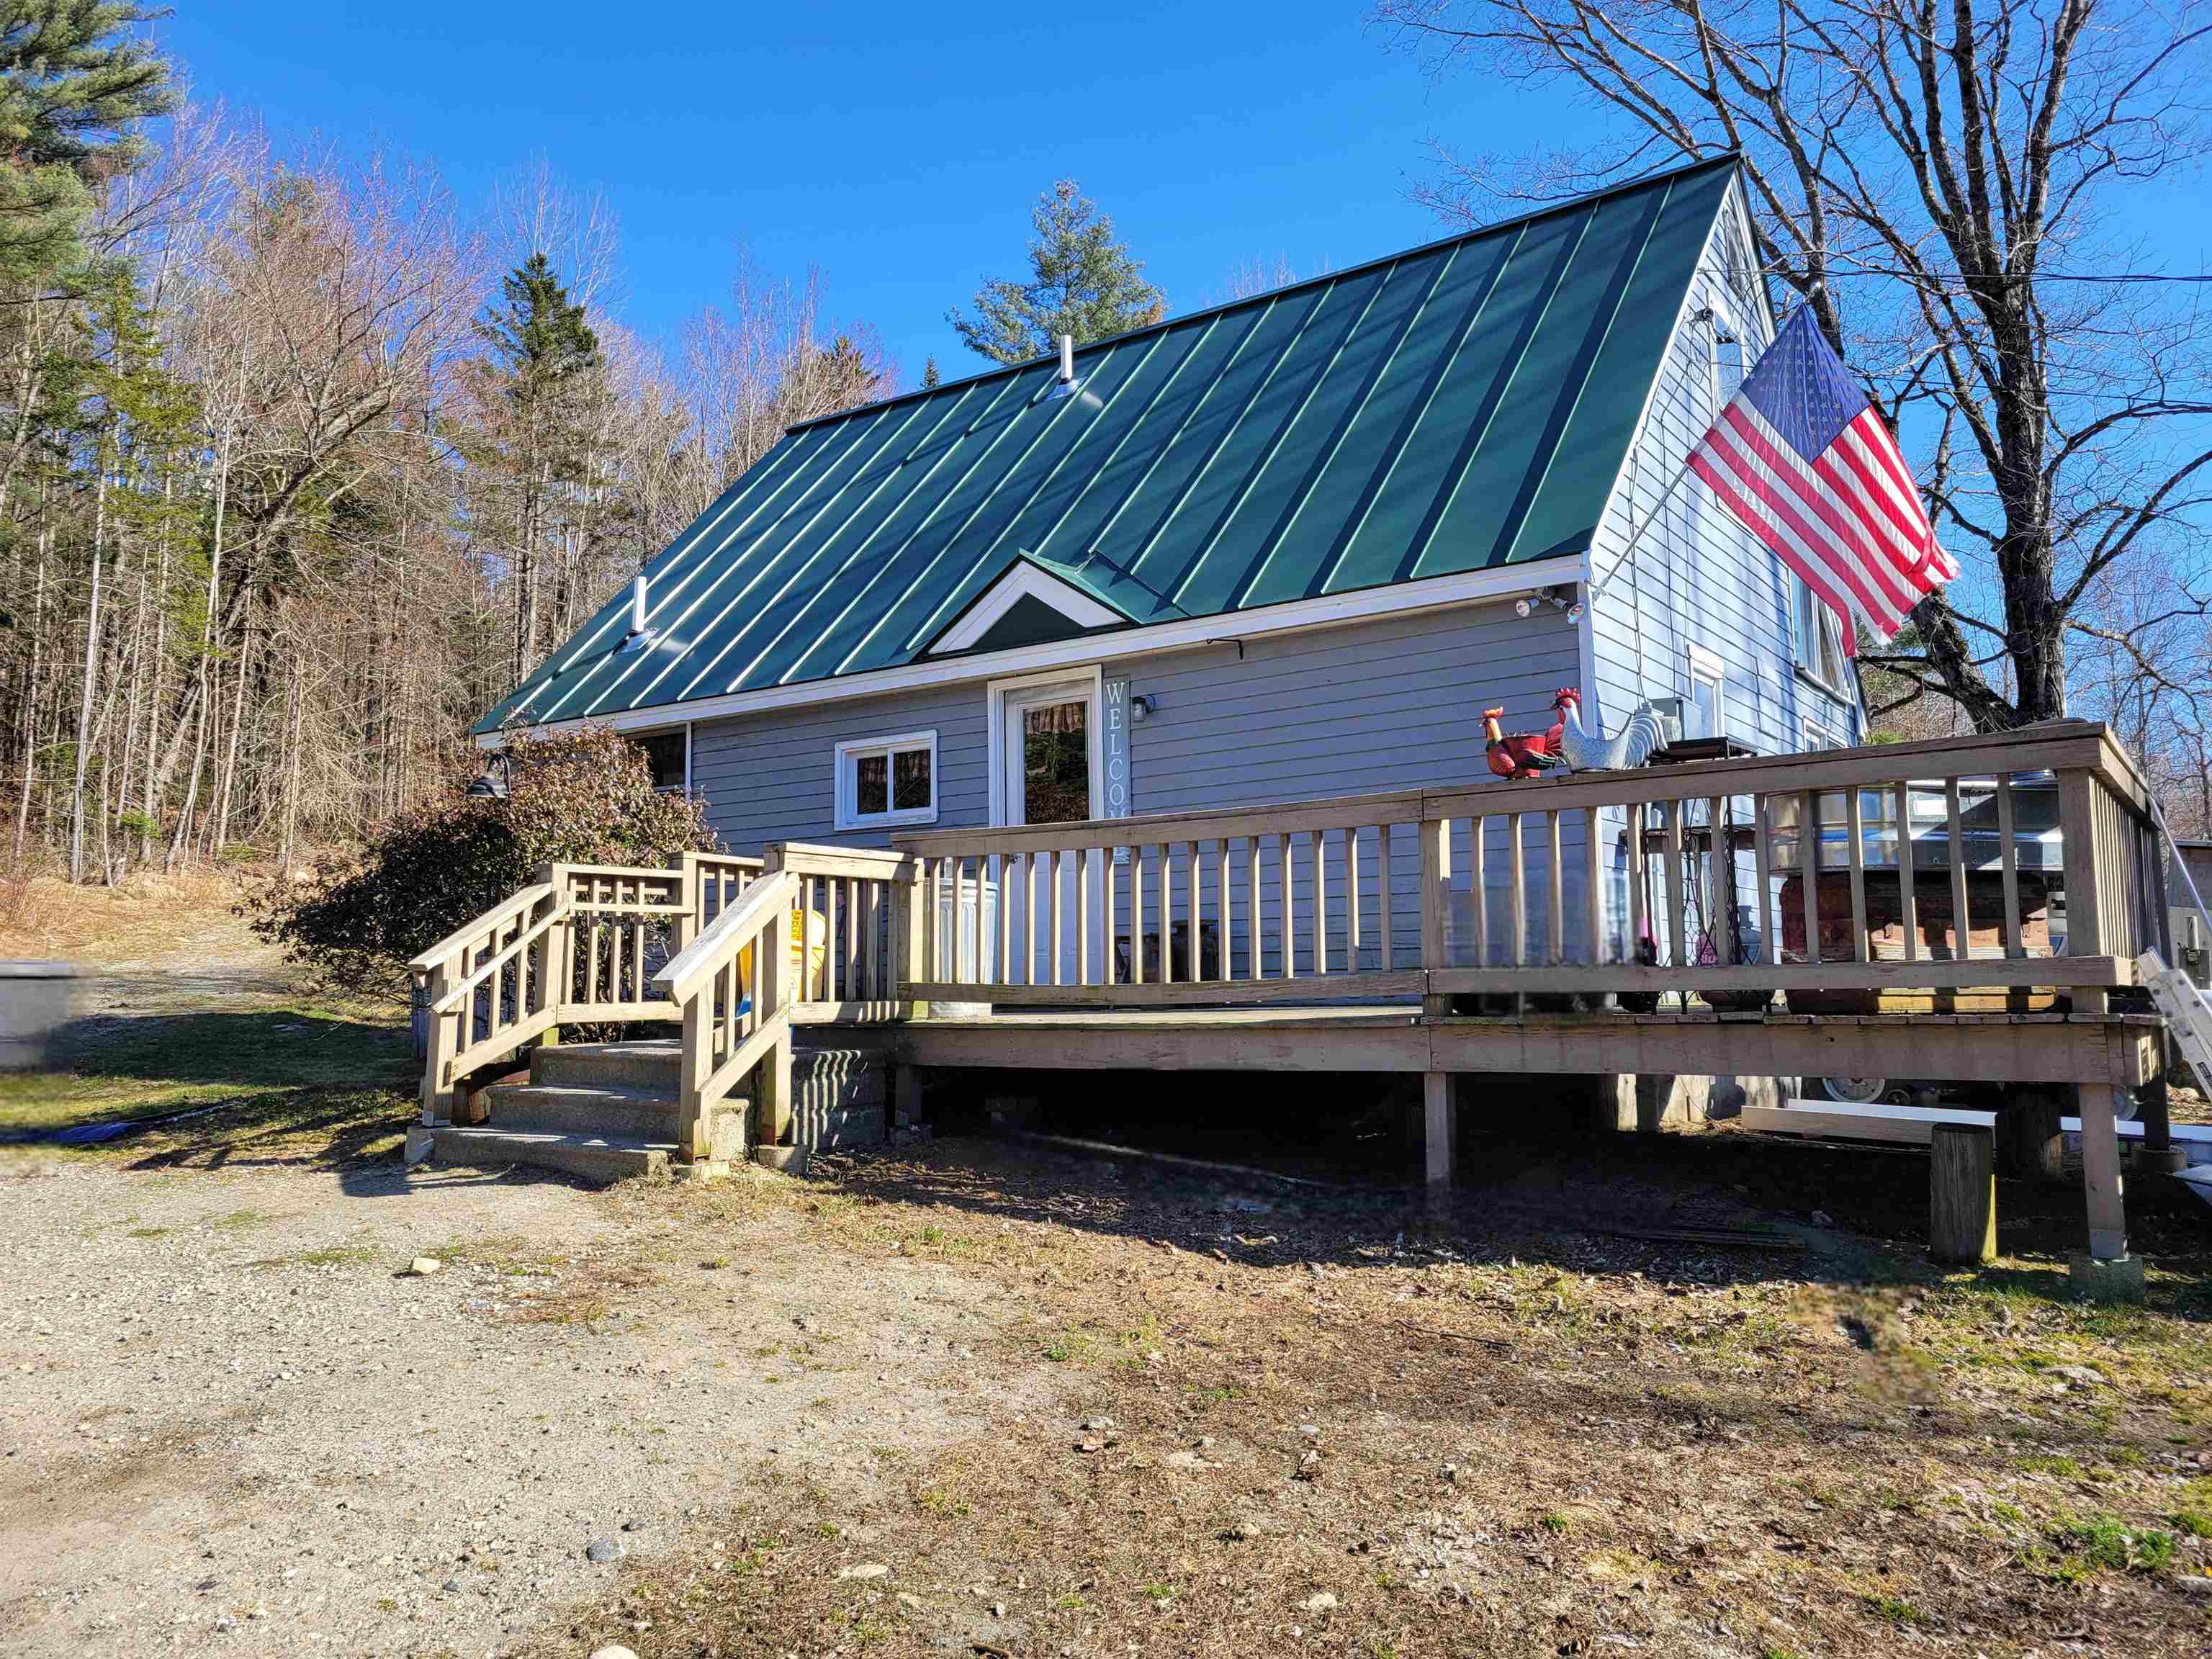 1.5 Story Single Family Home in Canaan NH